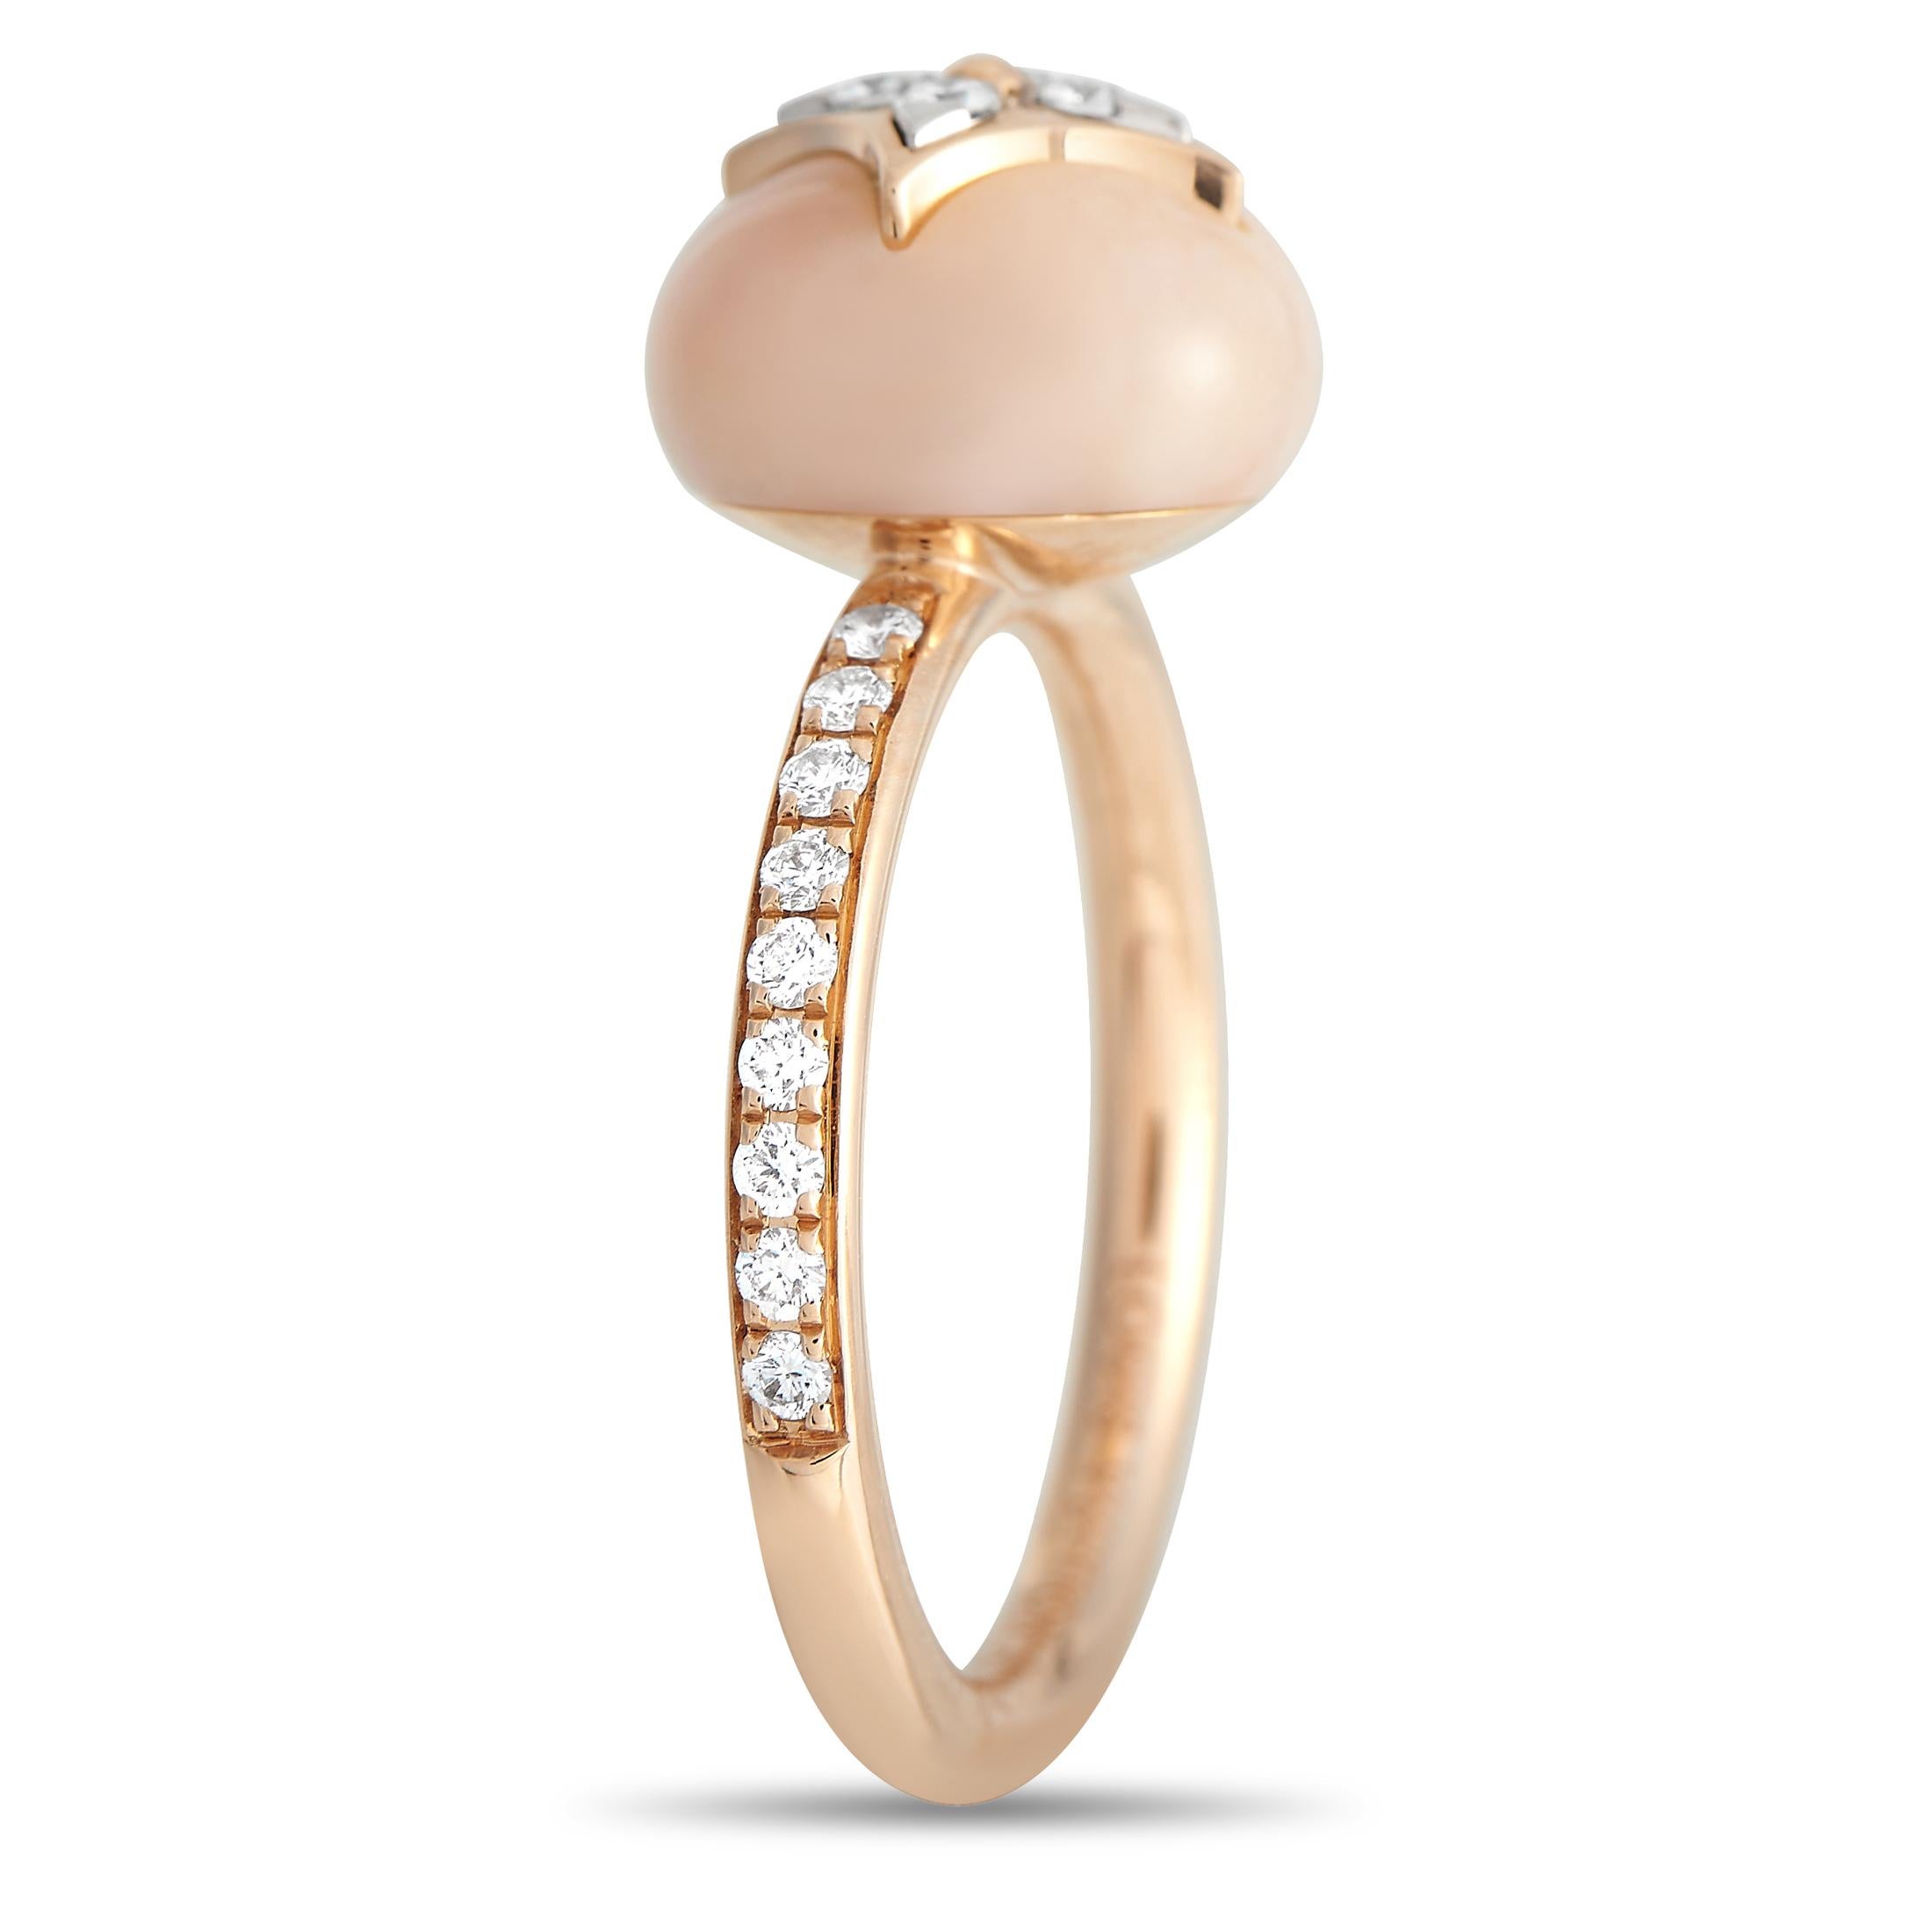 This Louis Vuitton Blossom ring is delicate, feminine, and incredibly elegant. An 18K rose gold setting is beautifully complemented by a stunning, pink-toned Opal orb at the center. Diamonds with a total weight of 0.30 carats make it even more